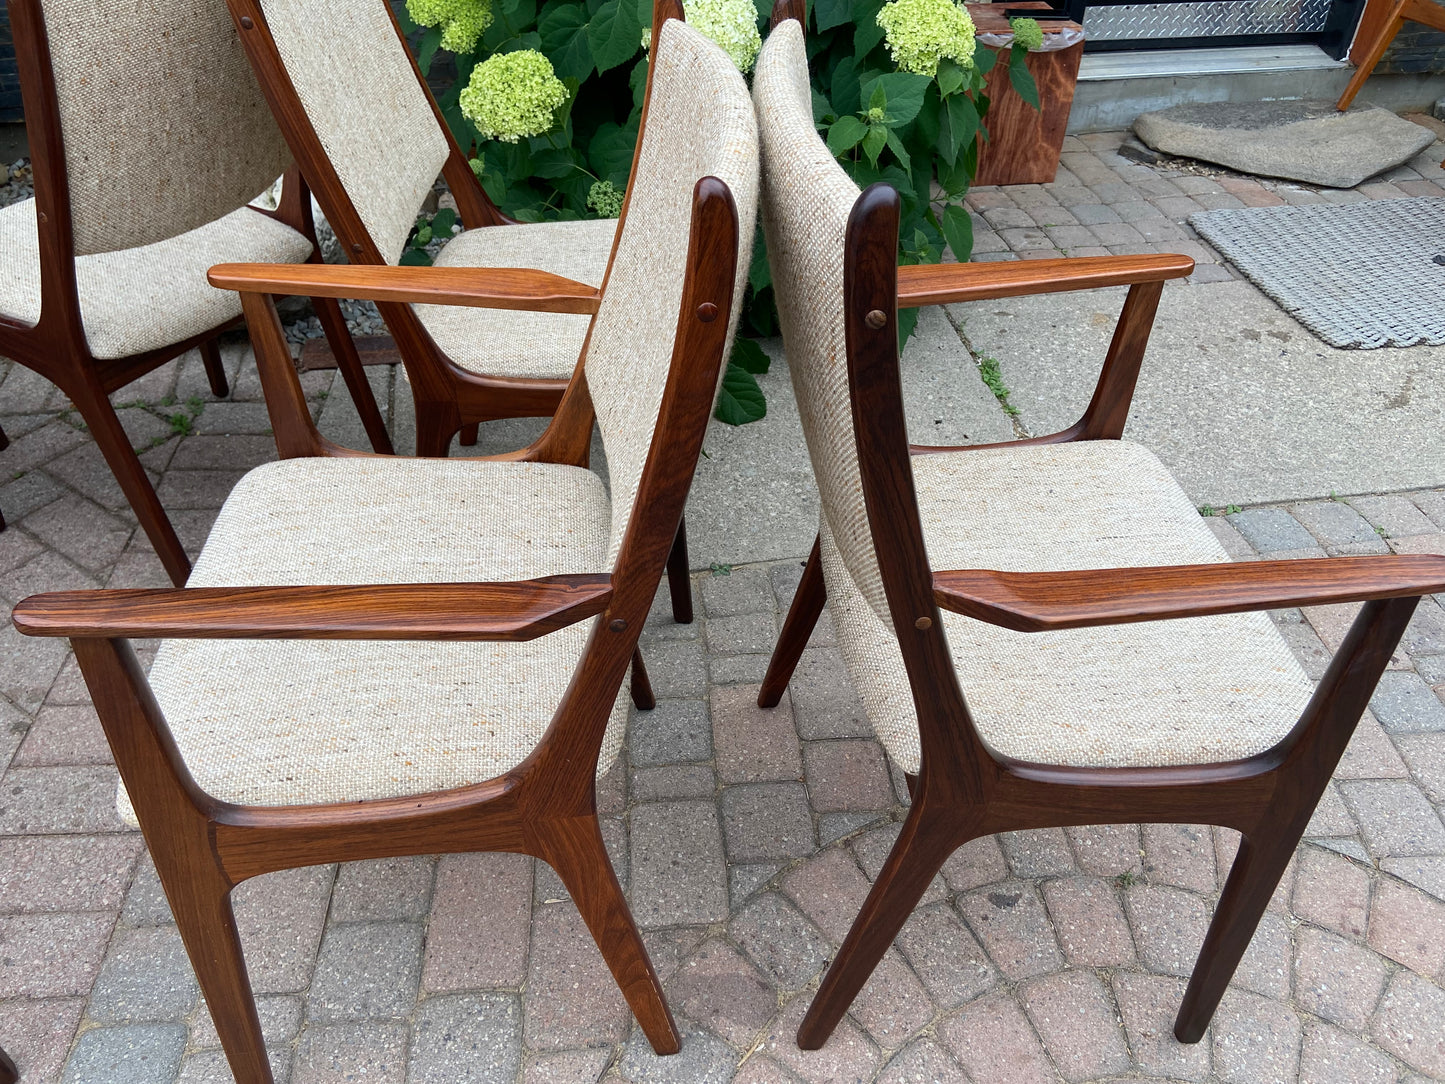 REFINISHED 8 Rosewood Danish Mid Century Modern Chairs by Kai Kristiansen, PERFECT